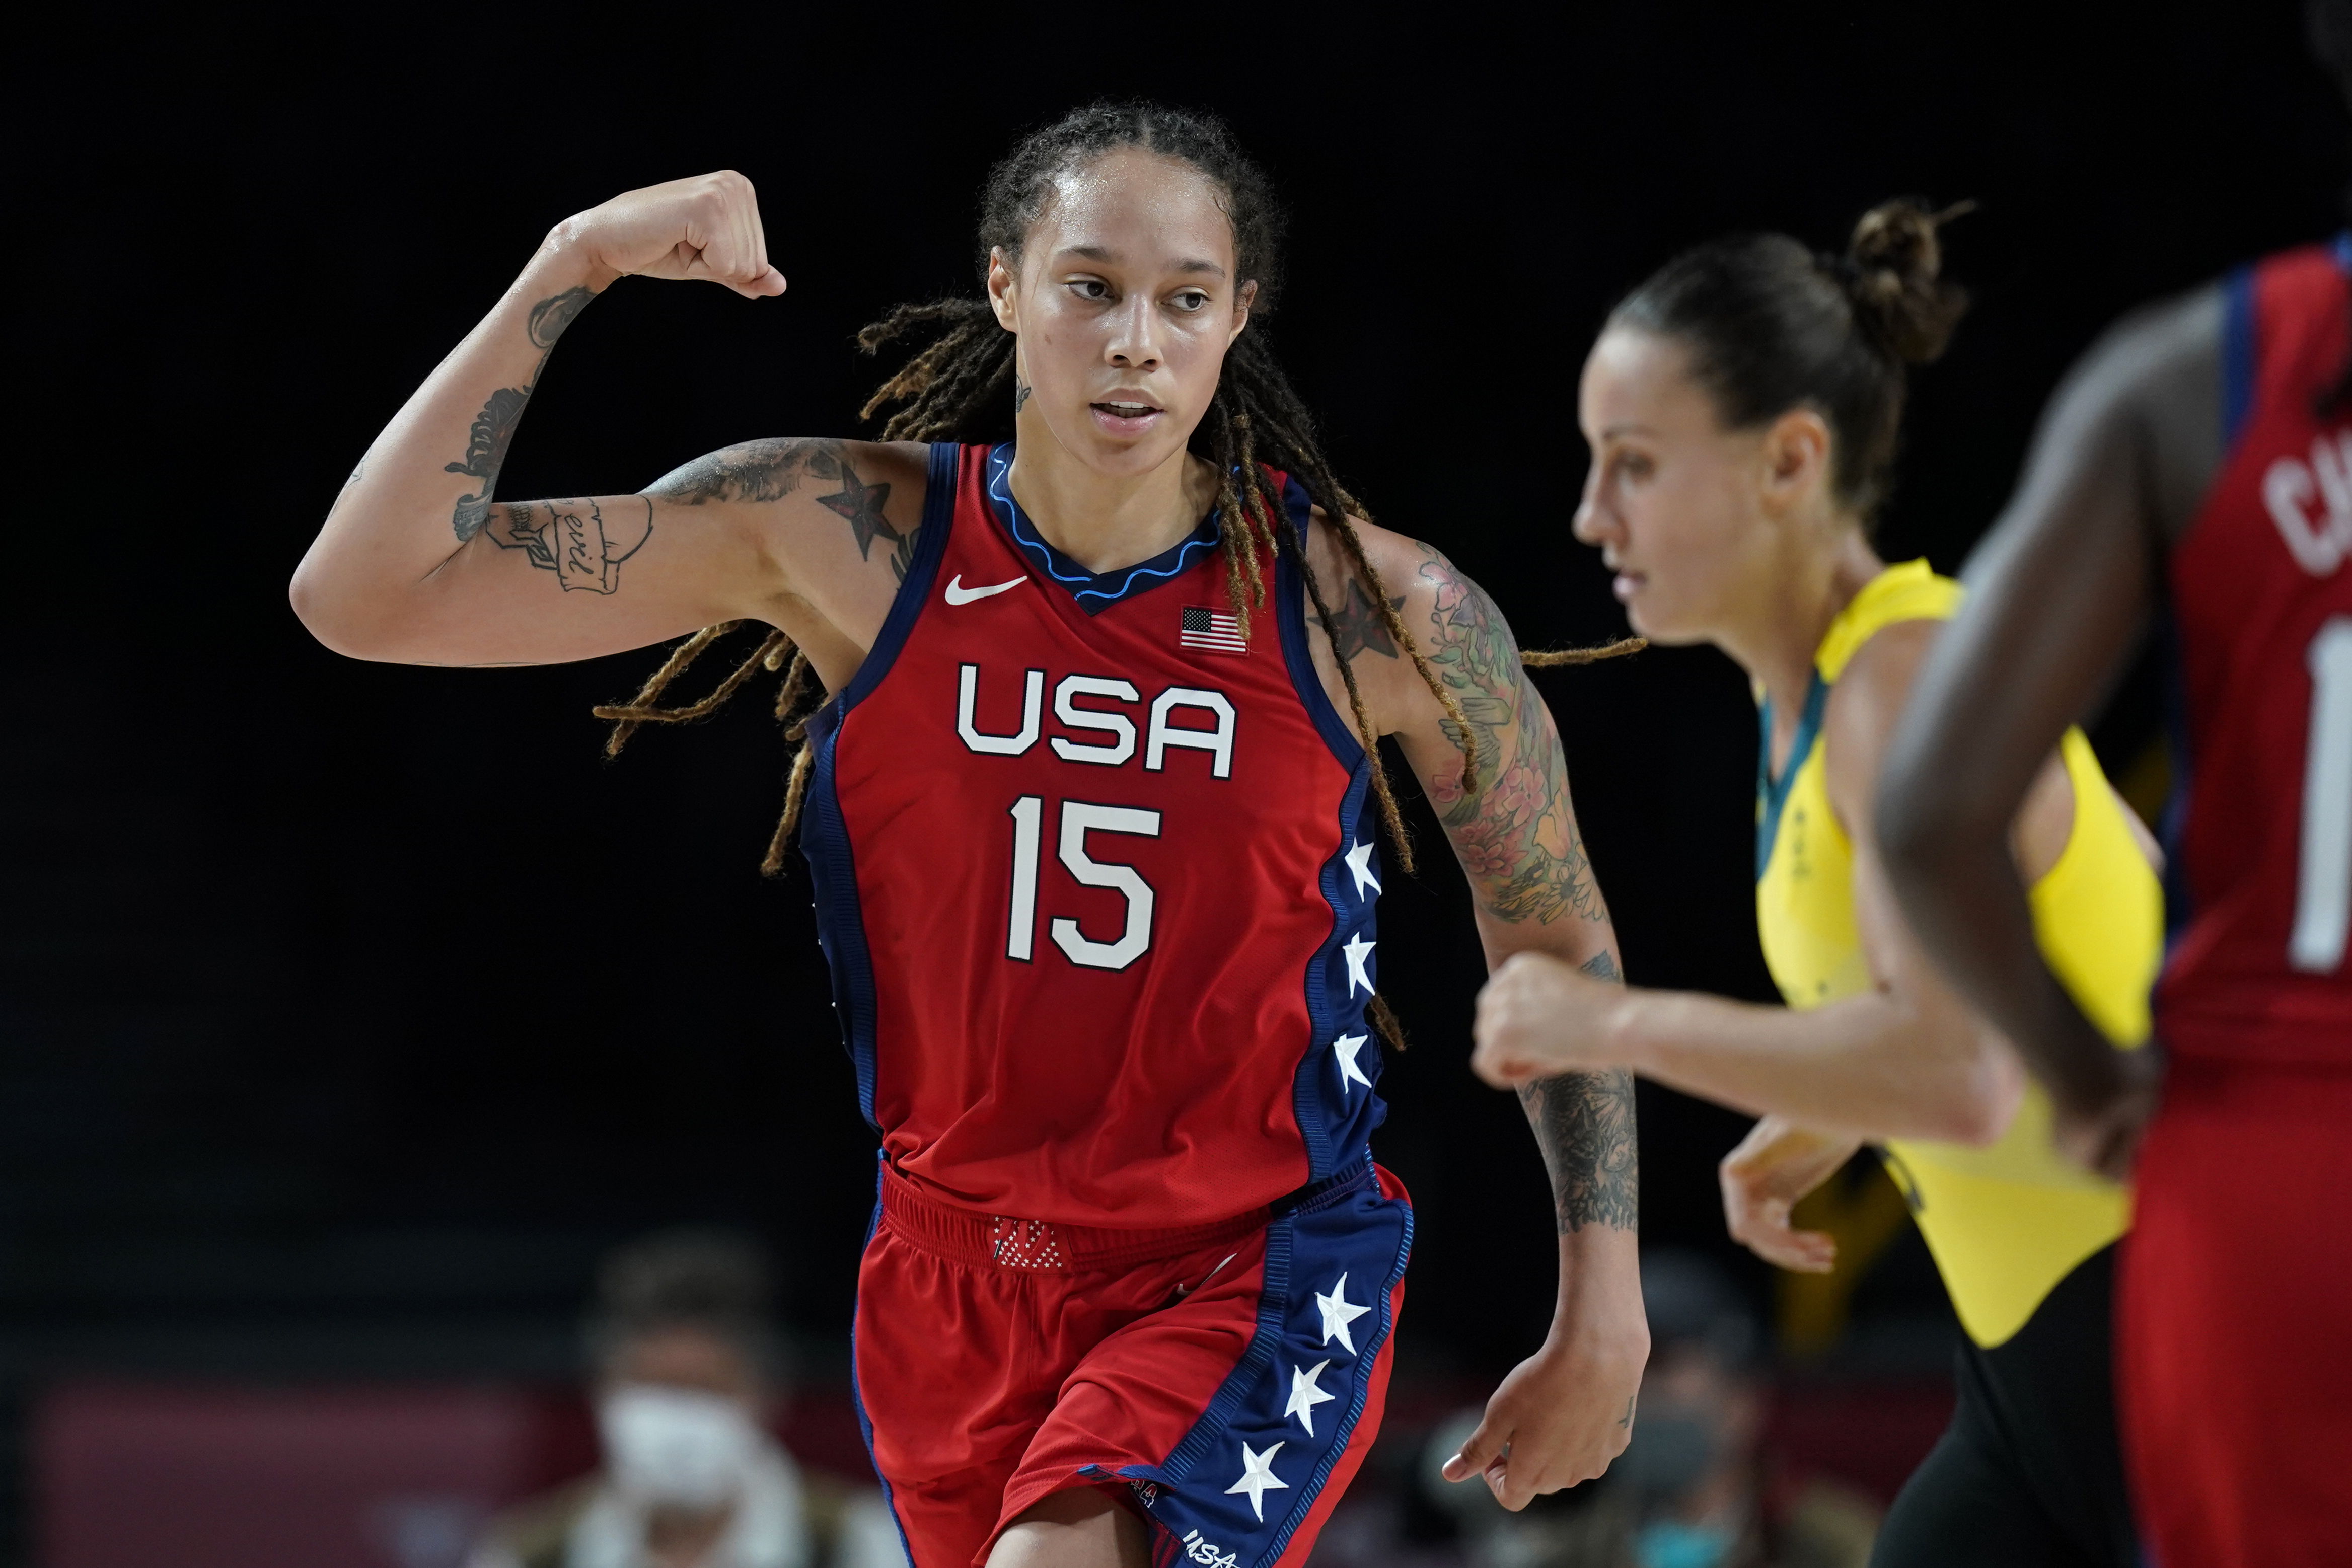 US Diplomat Describes Moments With Brittney Griner on Homebound